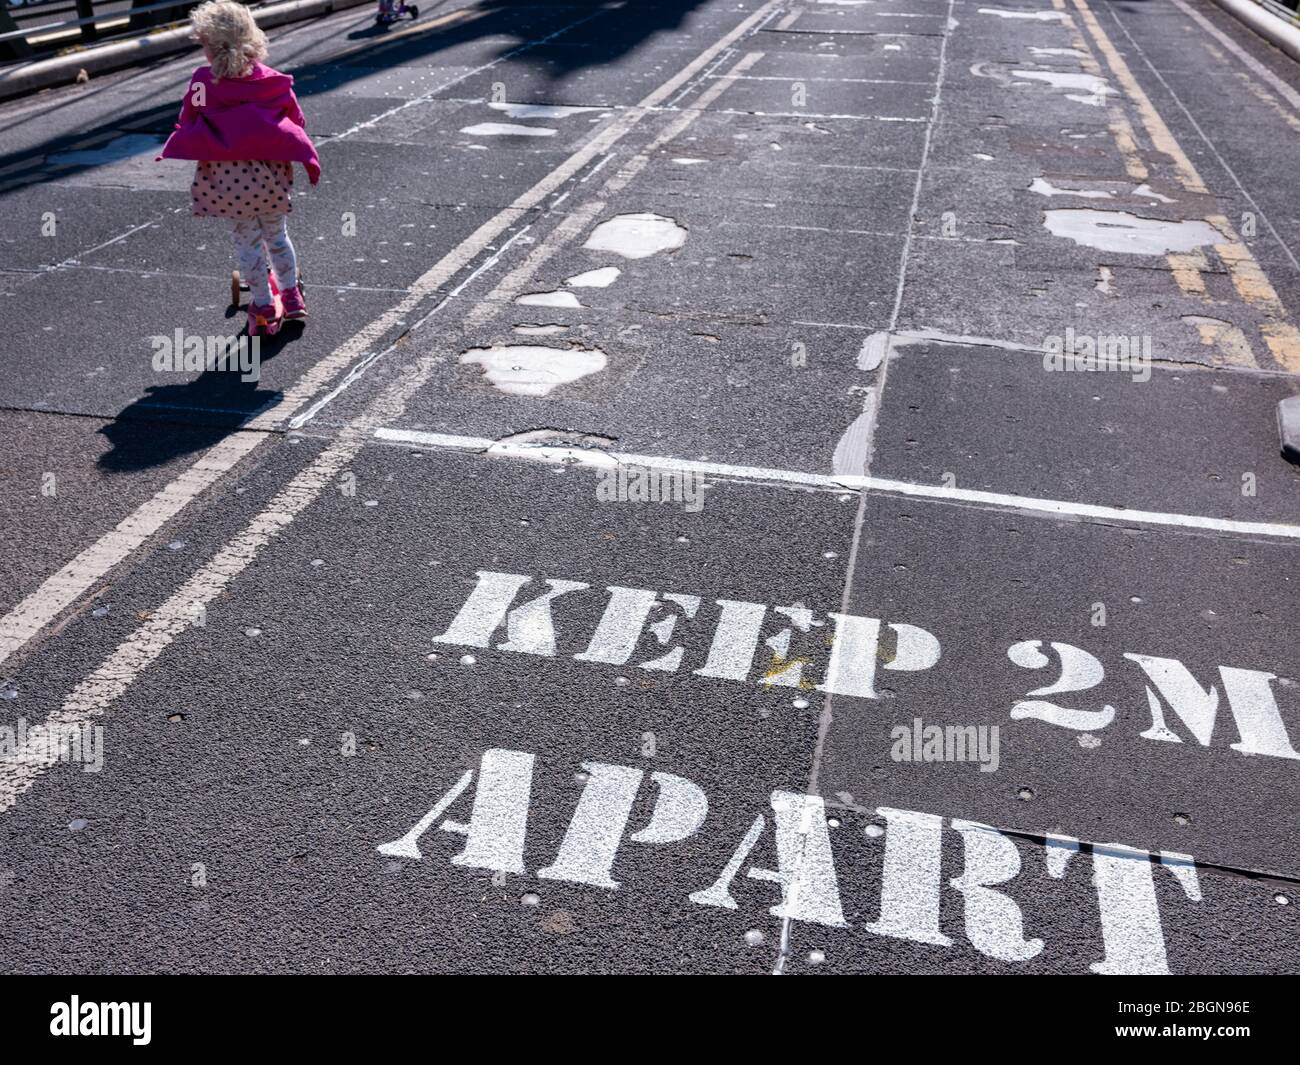 5th April 2020 A sign painted on the road surface warns pedestrians to keep their distance in order to prevent the Covid-19 virus spreading. A two yea Stock Photo